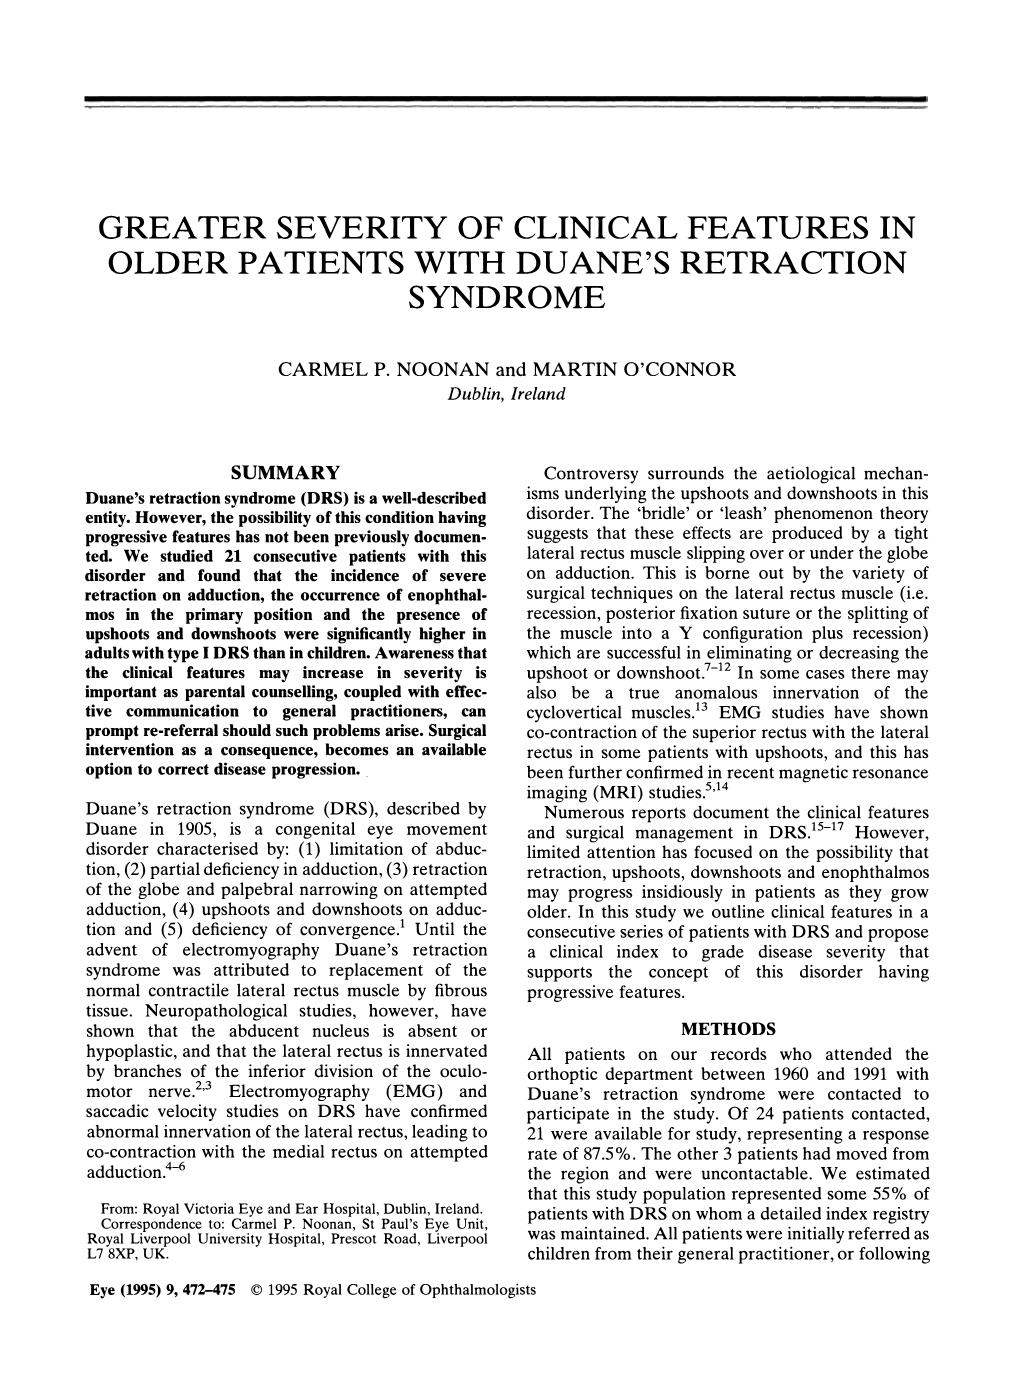 Greater Severity of Clinical Features in Older Patients with Duane's Retraction Syndrome